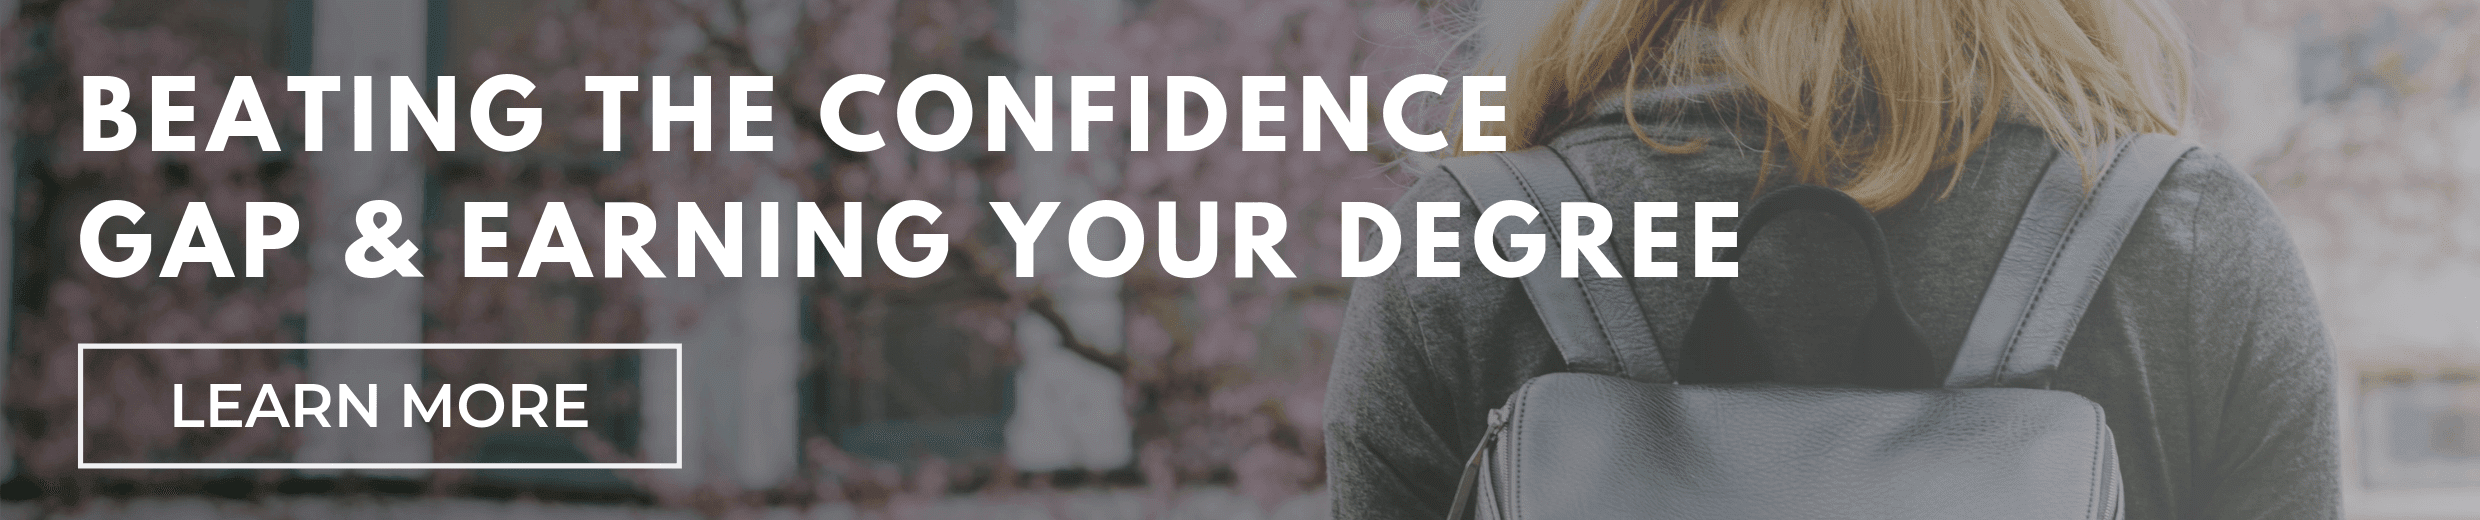 Beating the Confidence Gap and Earning Your Degree